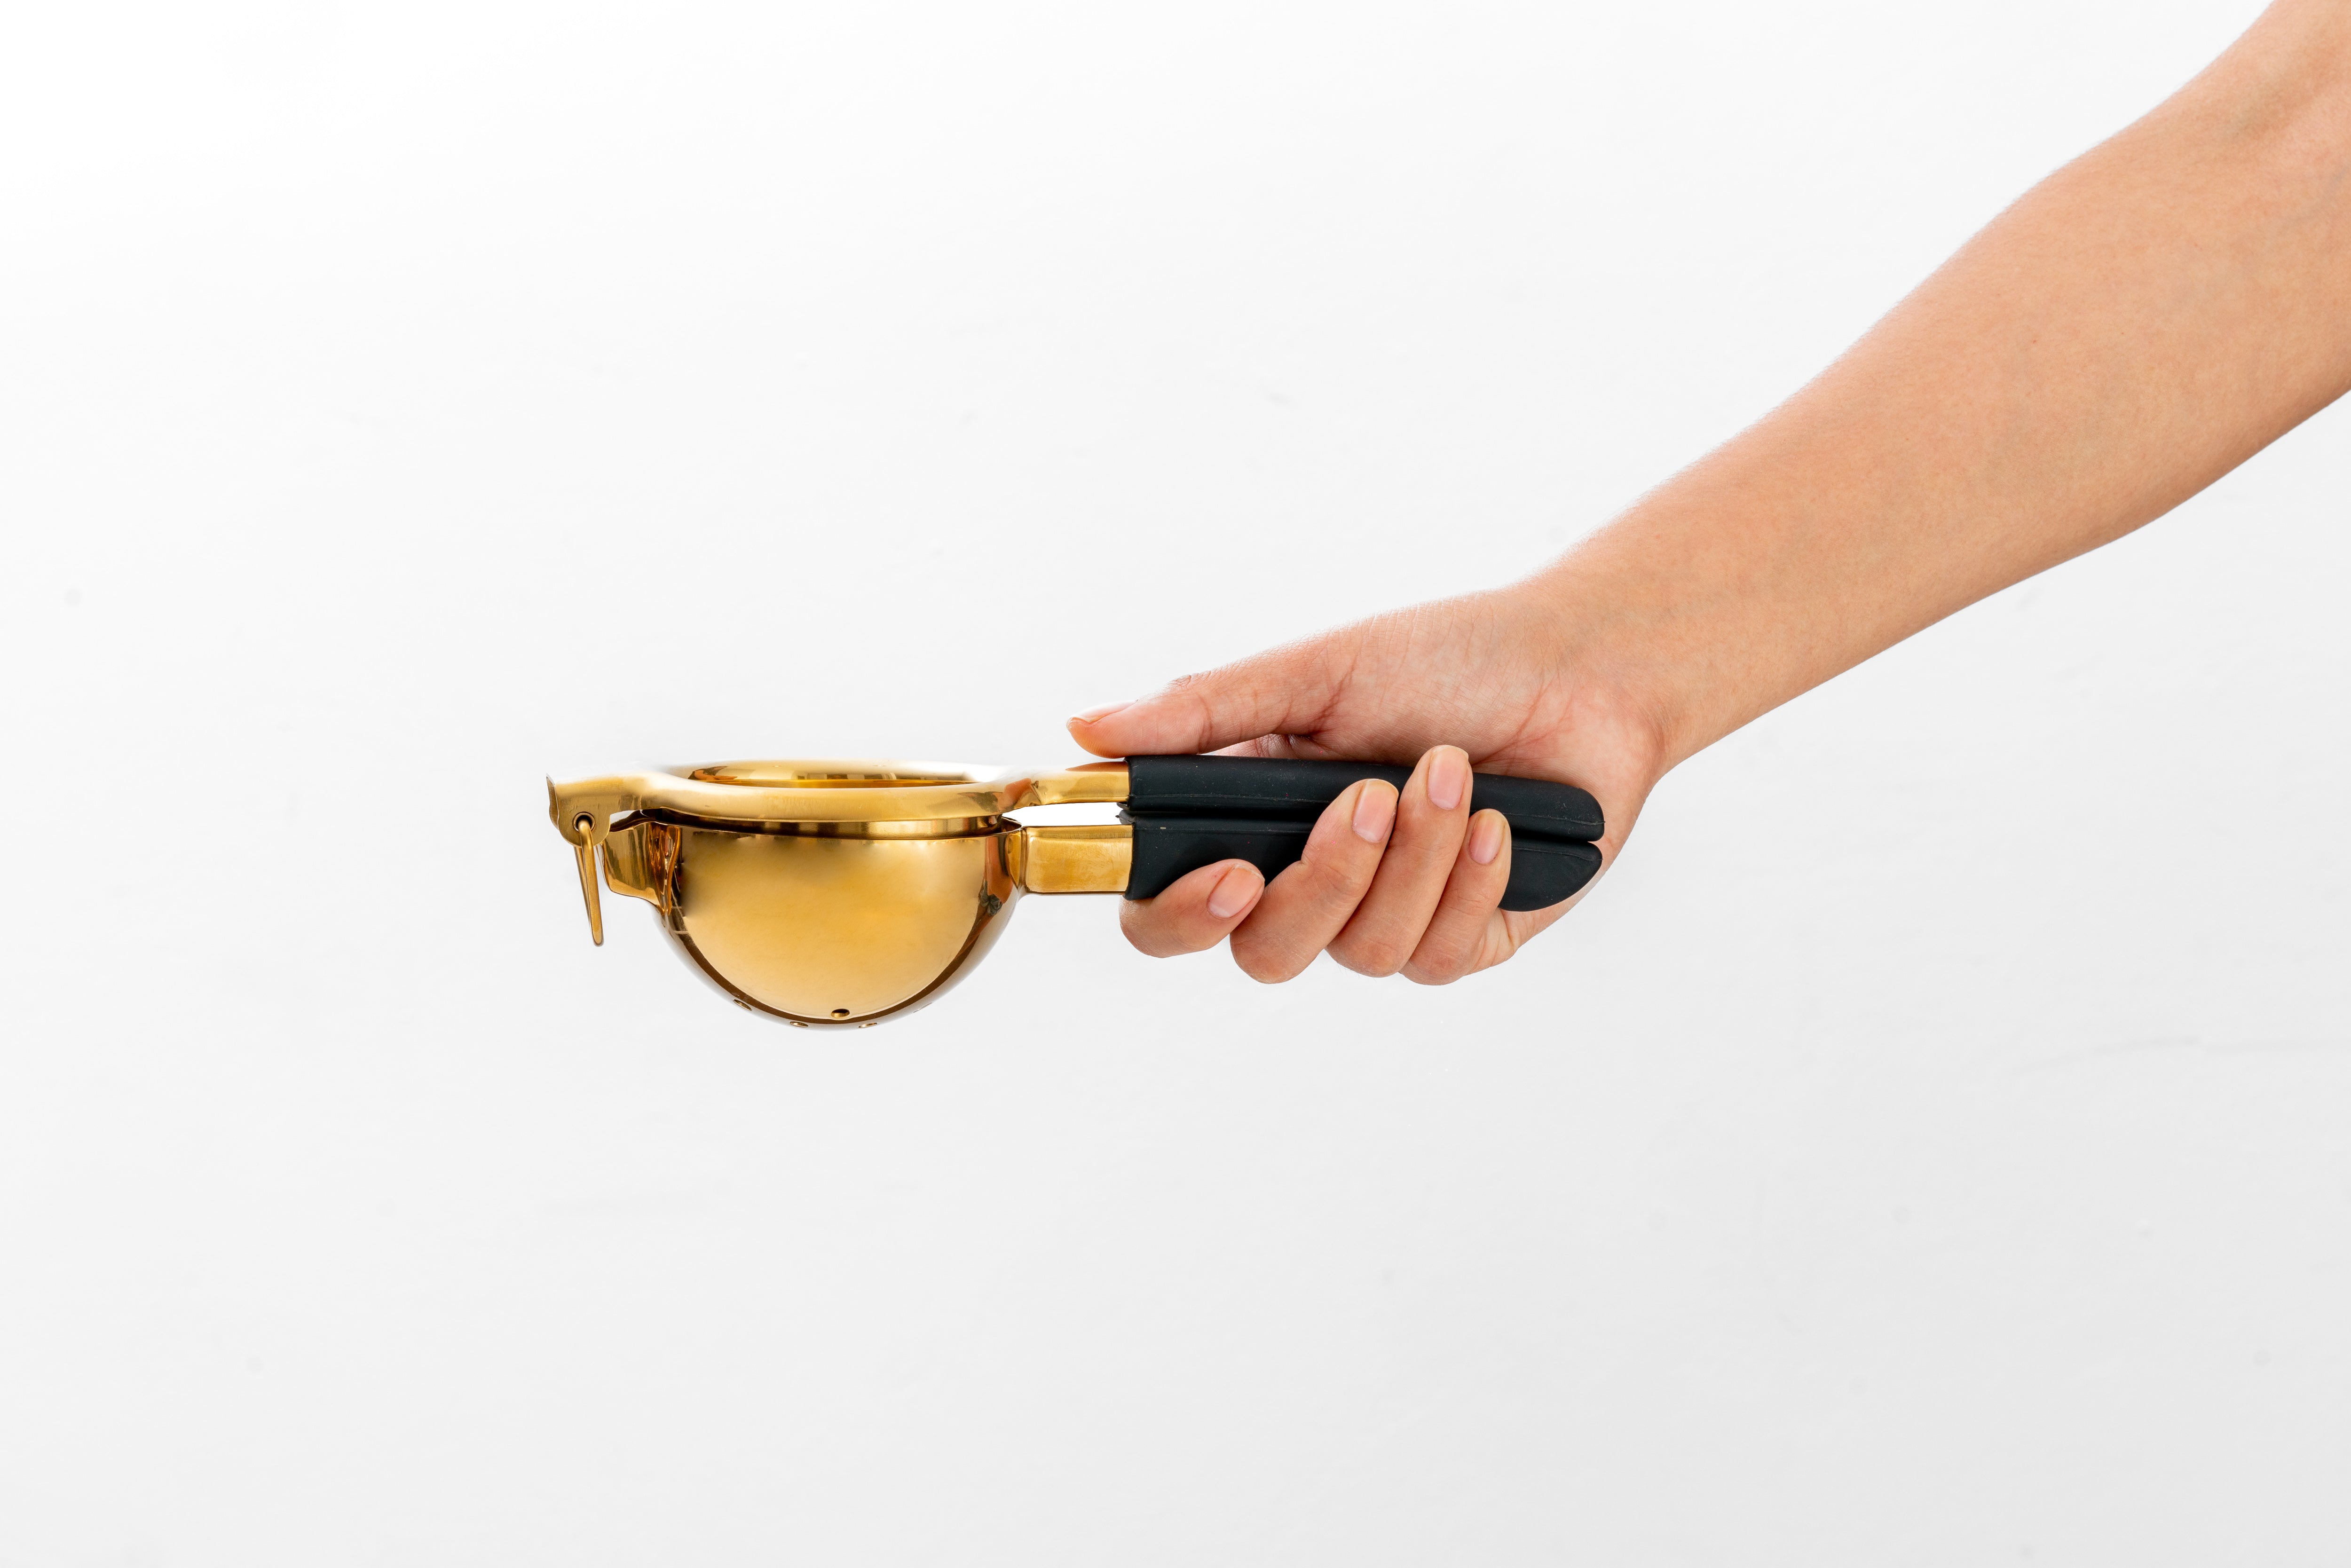 Hand holding a gold lemon juicer with black silicone handles, set against a white backdrop